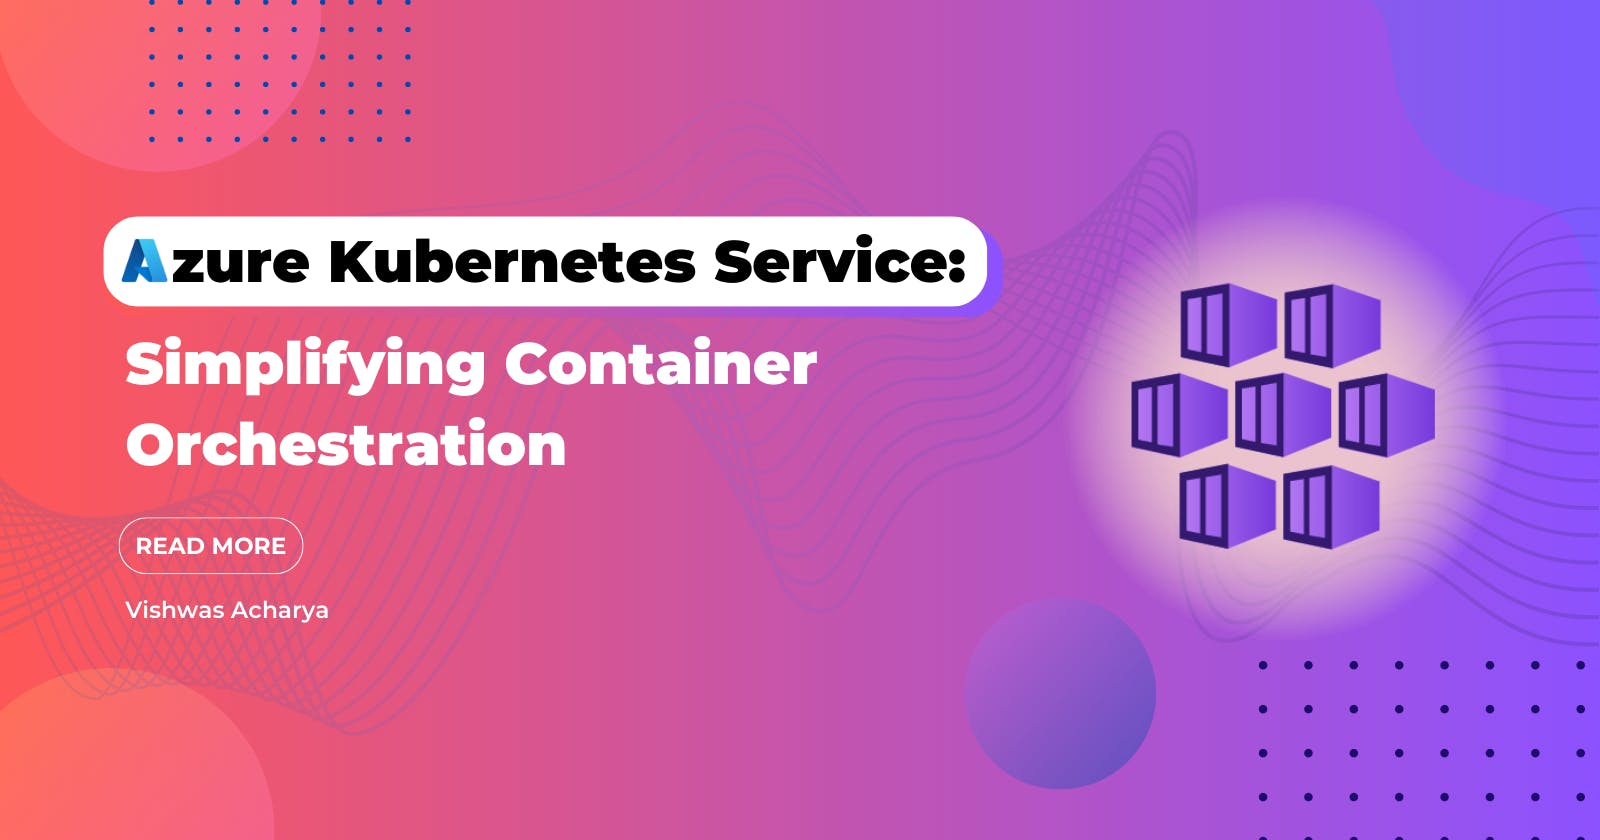 Azure Kubernetes Service: Simplifying Container Orchestration